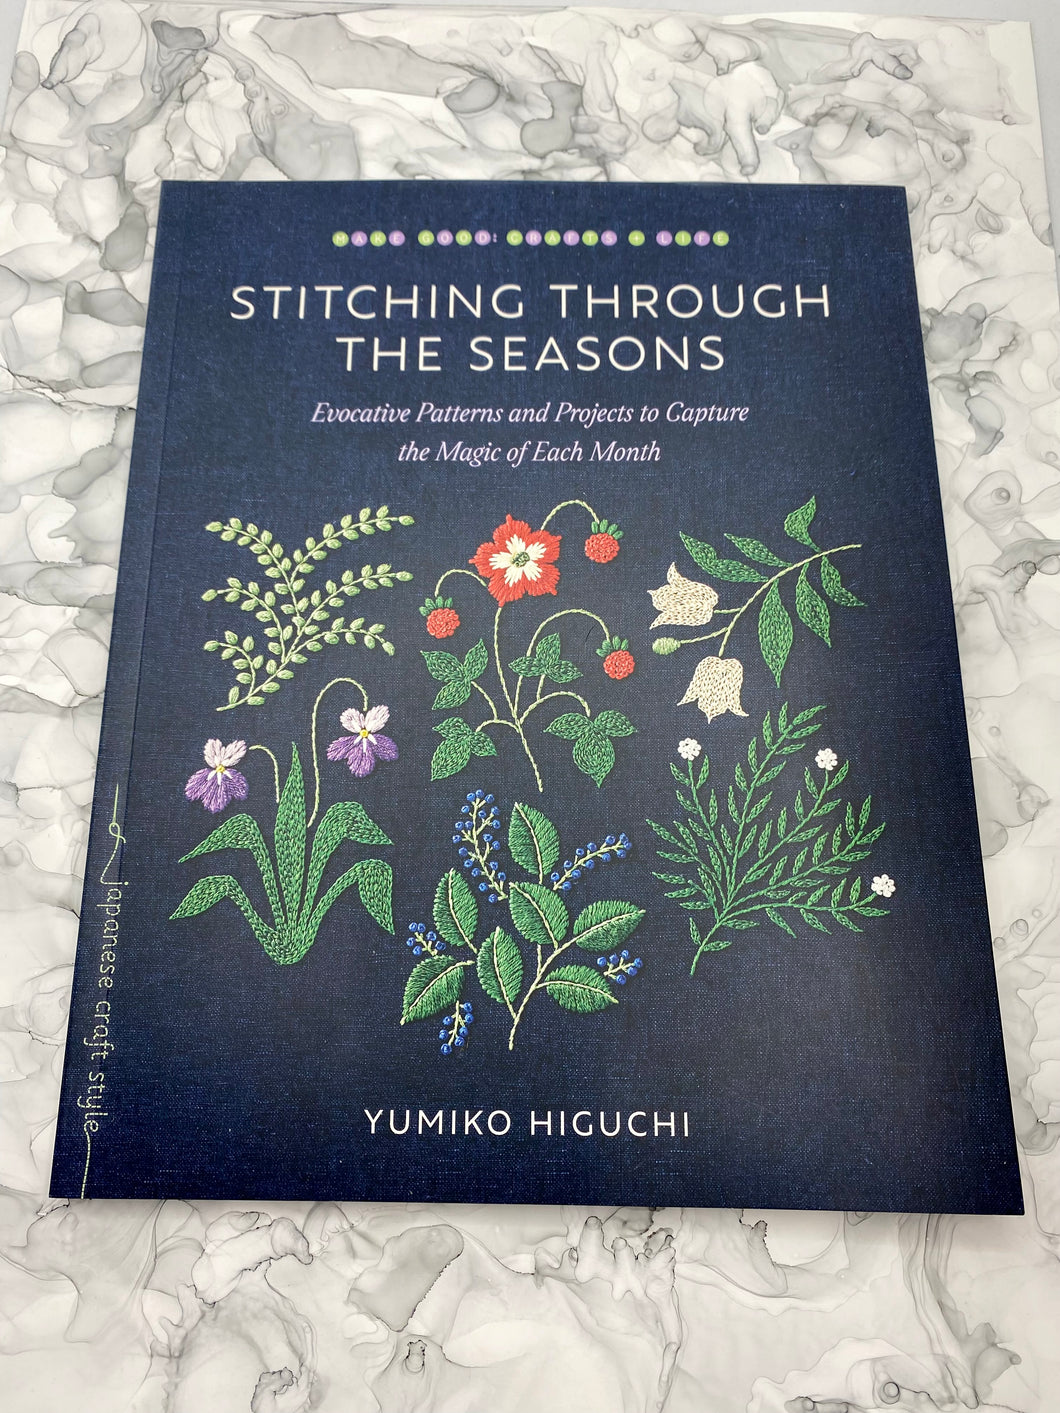 Stitching Through the Seasons: Evocative Patterns and Projects to Capture the Magic of Each Month by Yumiko Higuchi